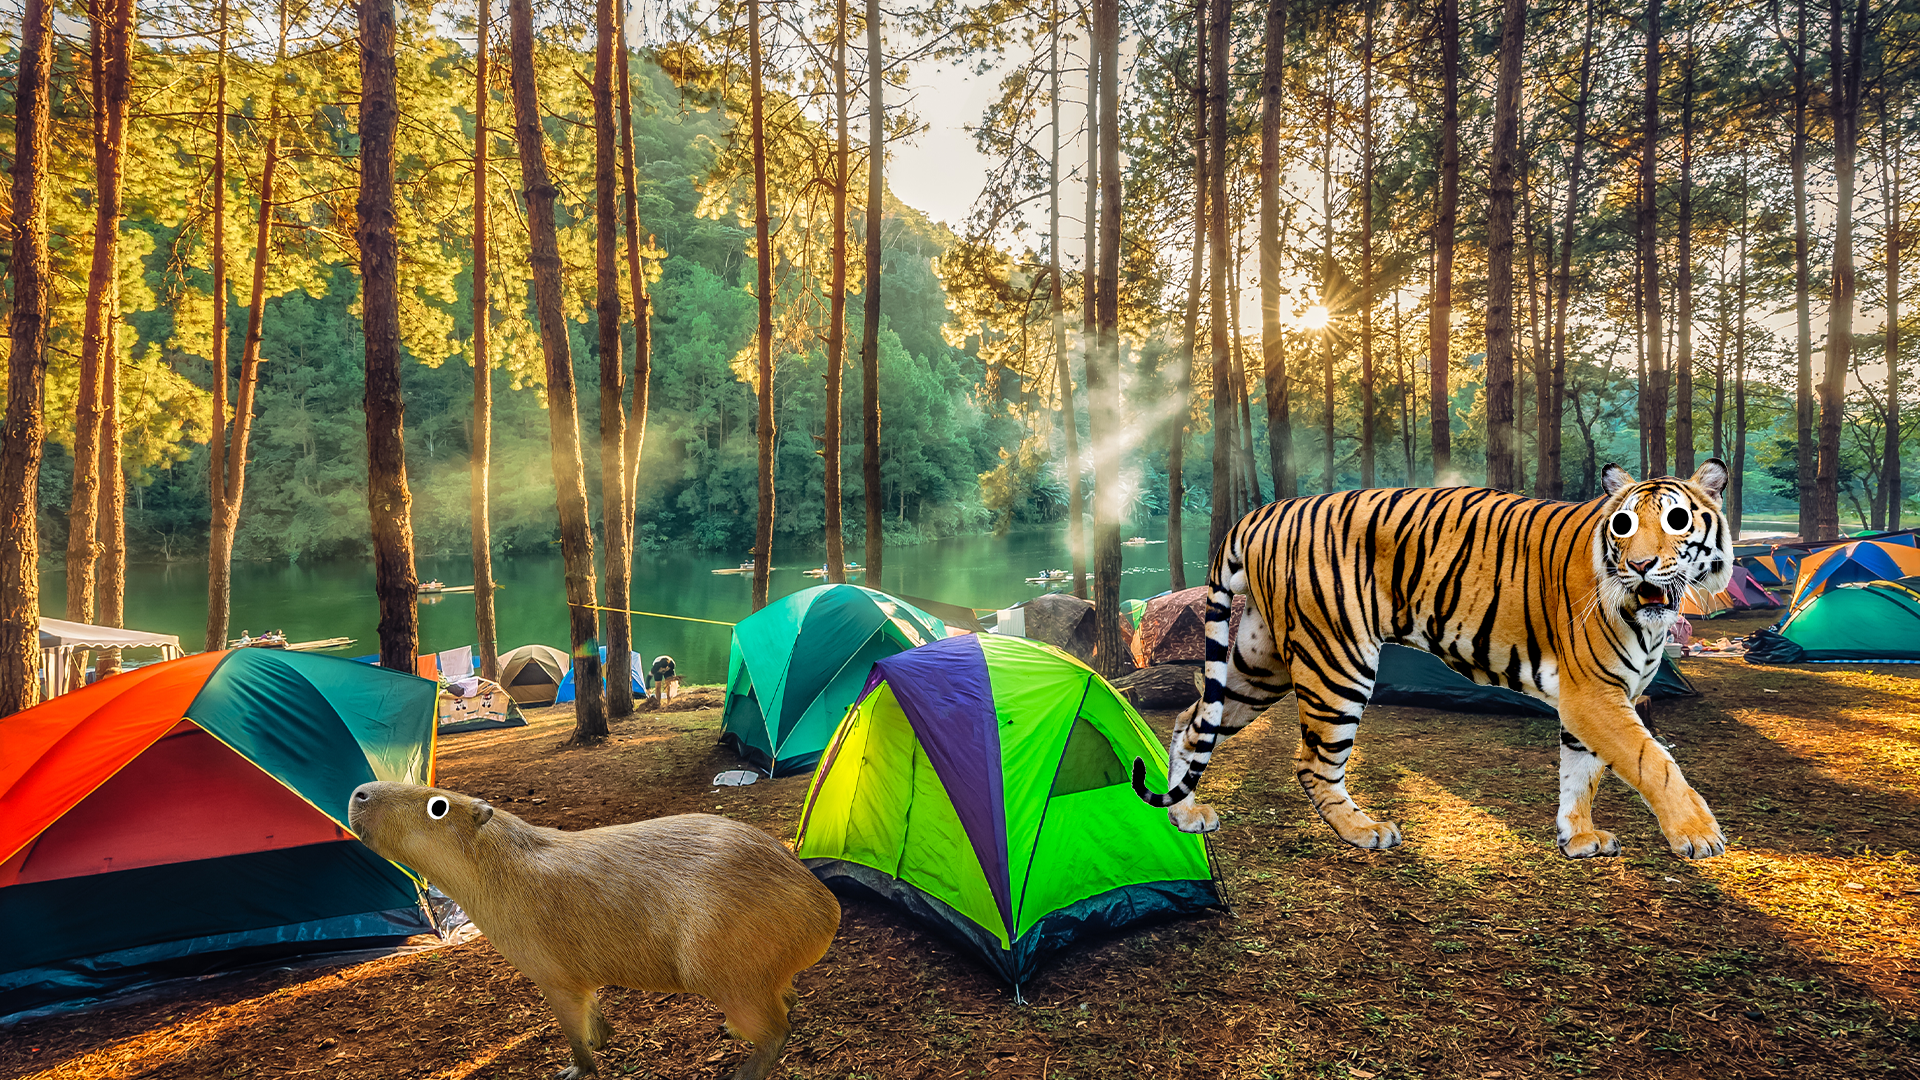 Tents in forest with Beano tiger and capybara 